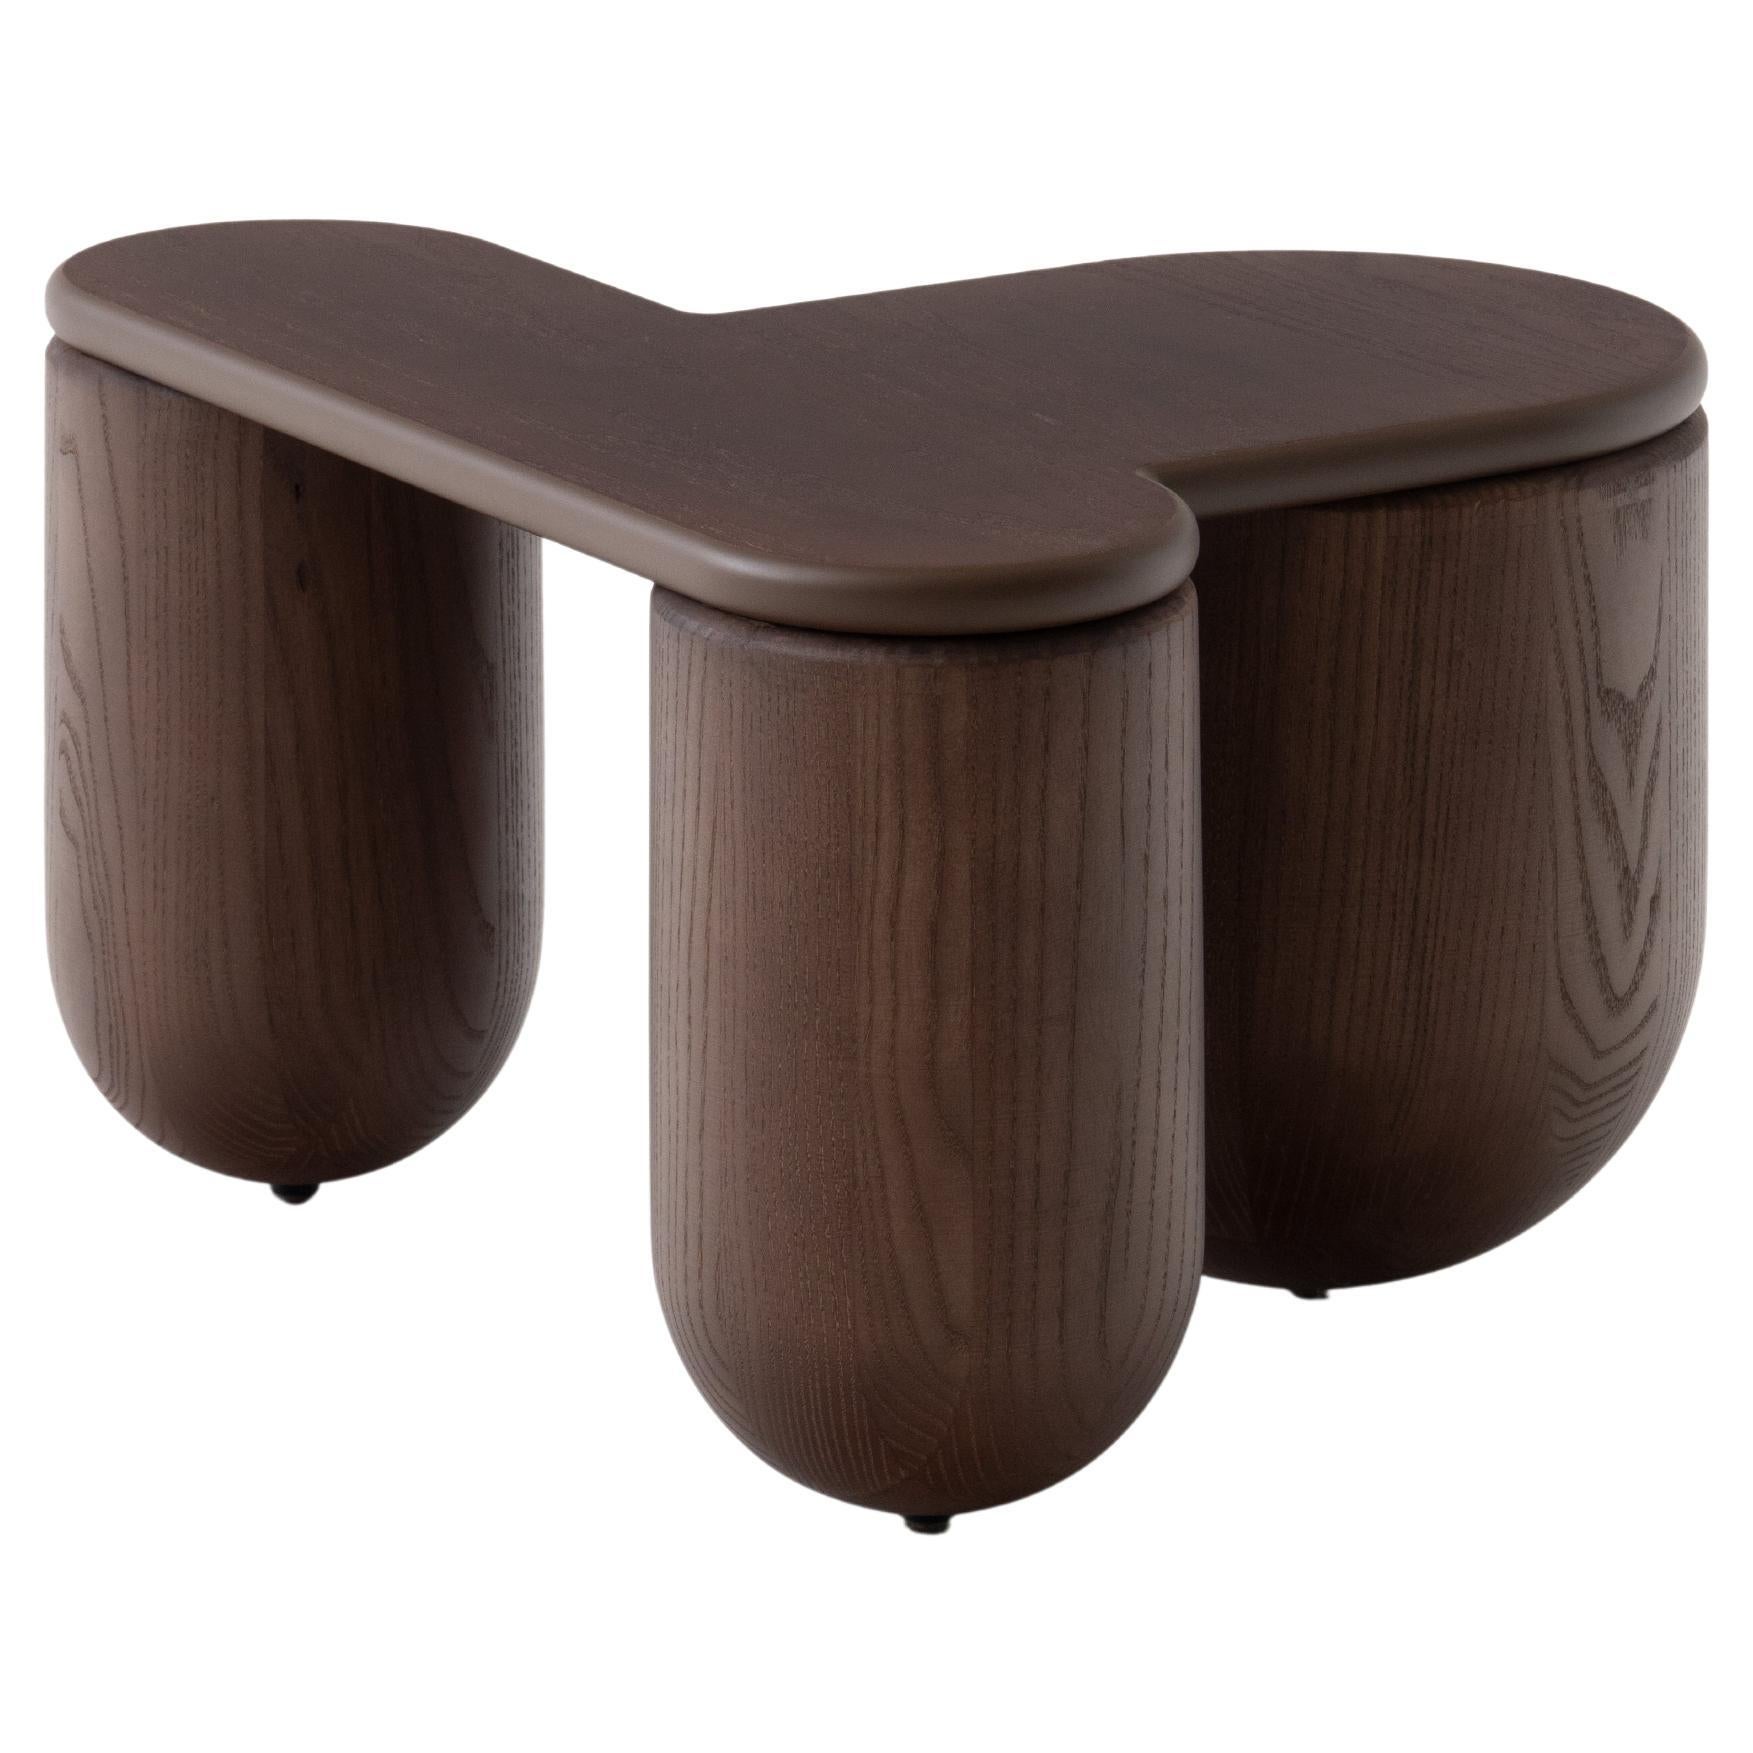 Contemporary Coffee or Side Table 'Hello 2' by Noom, Ashwood, Brown